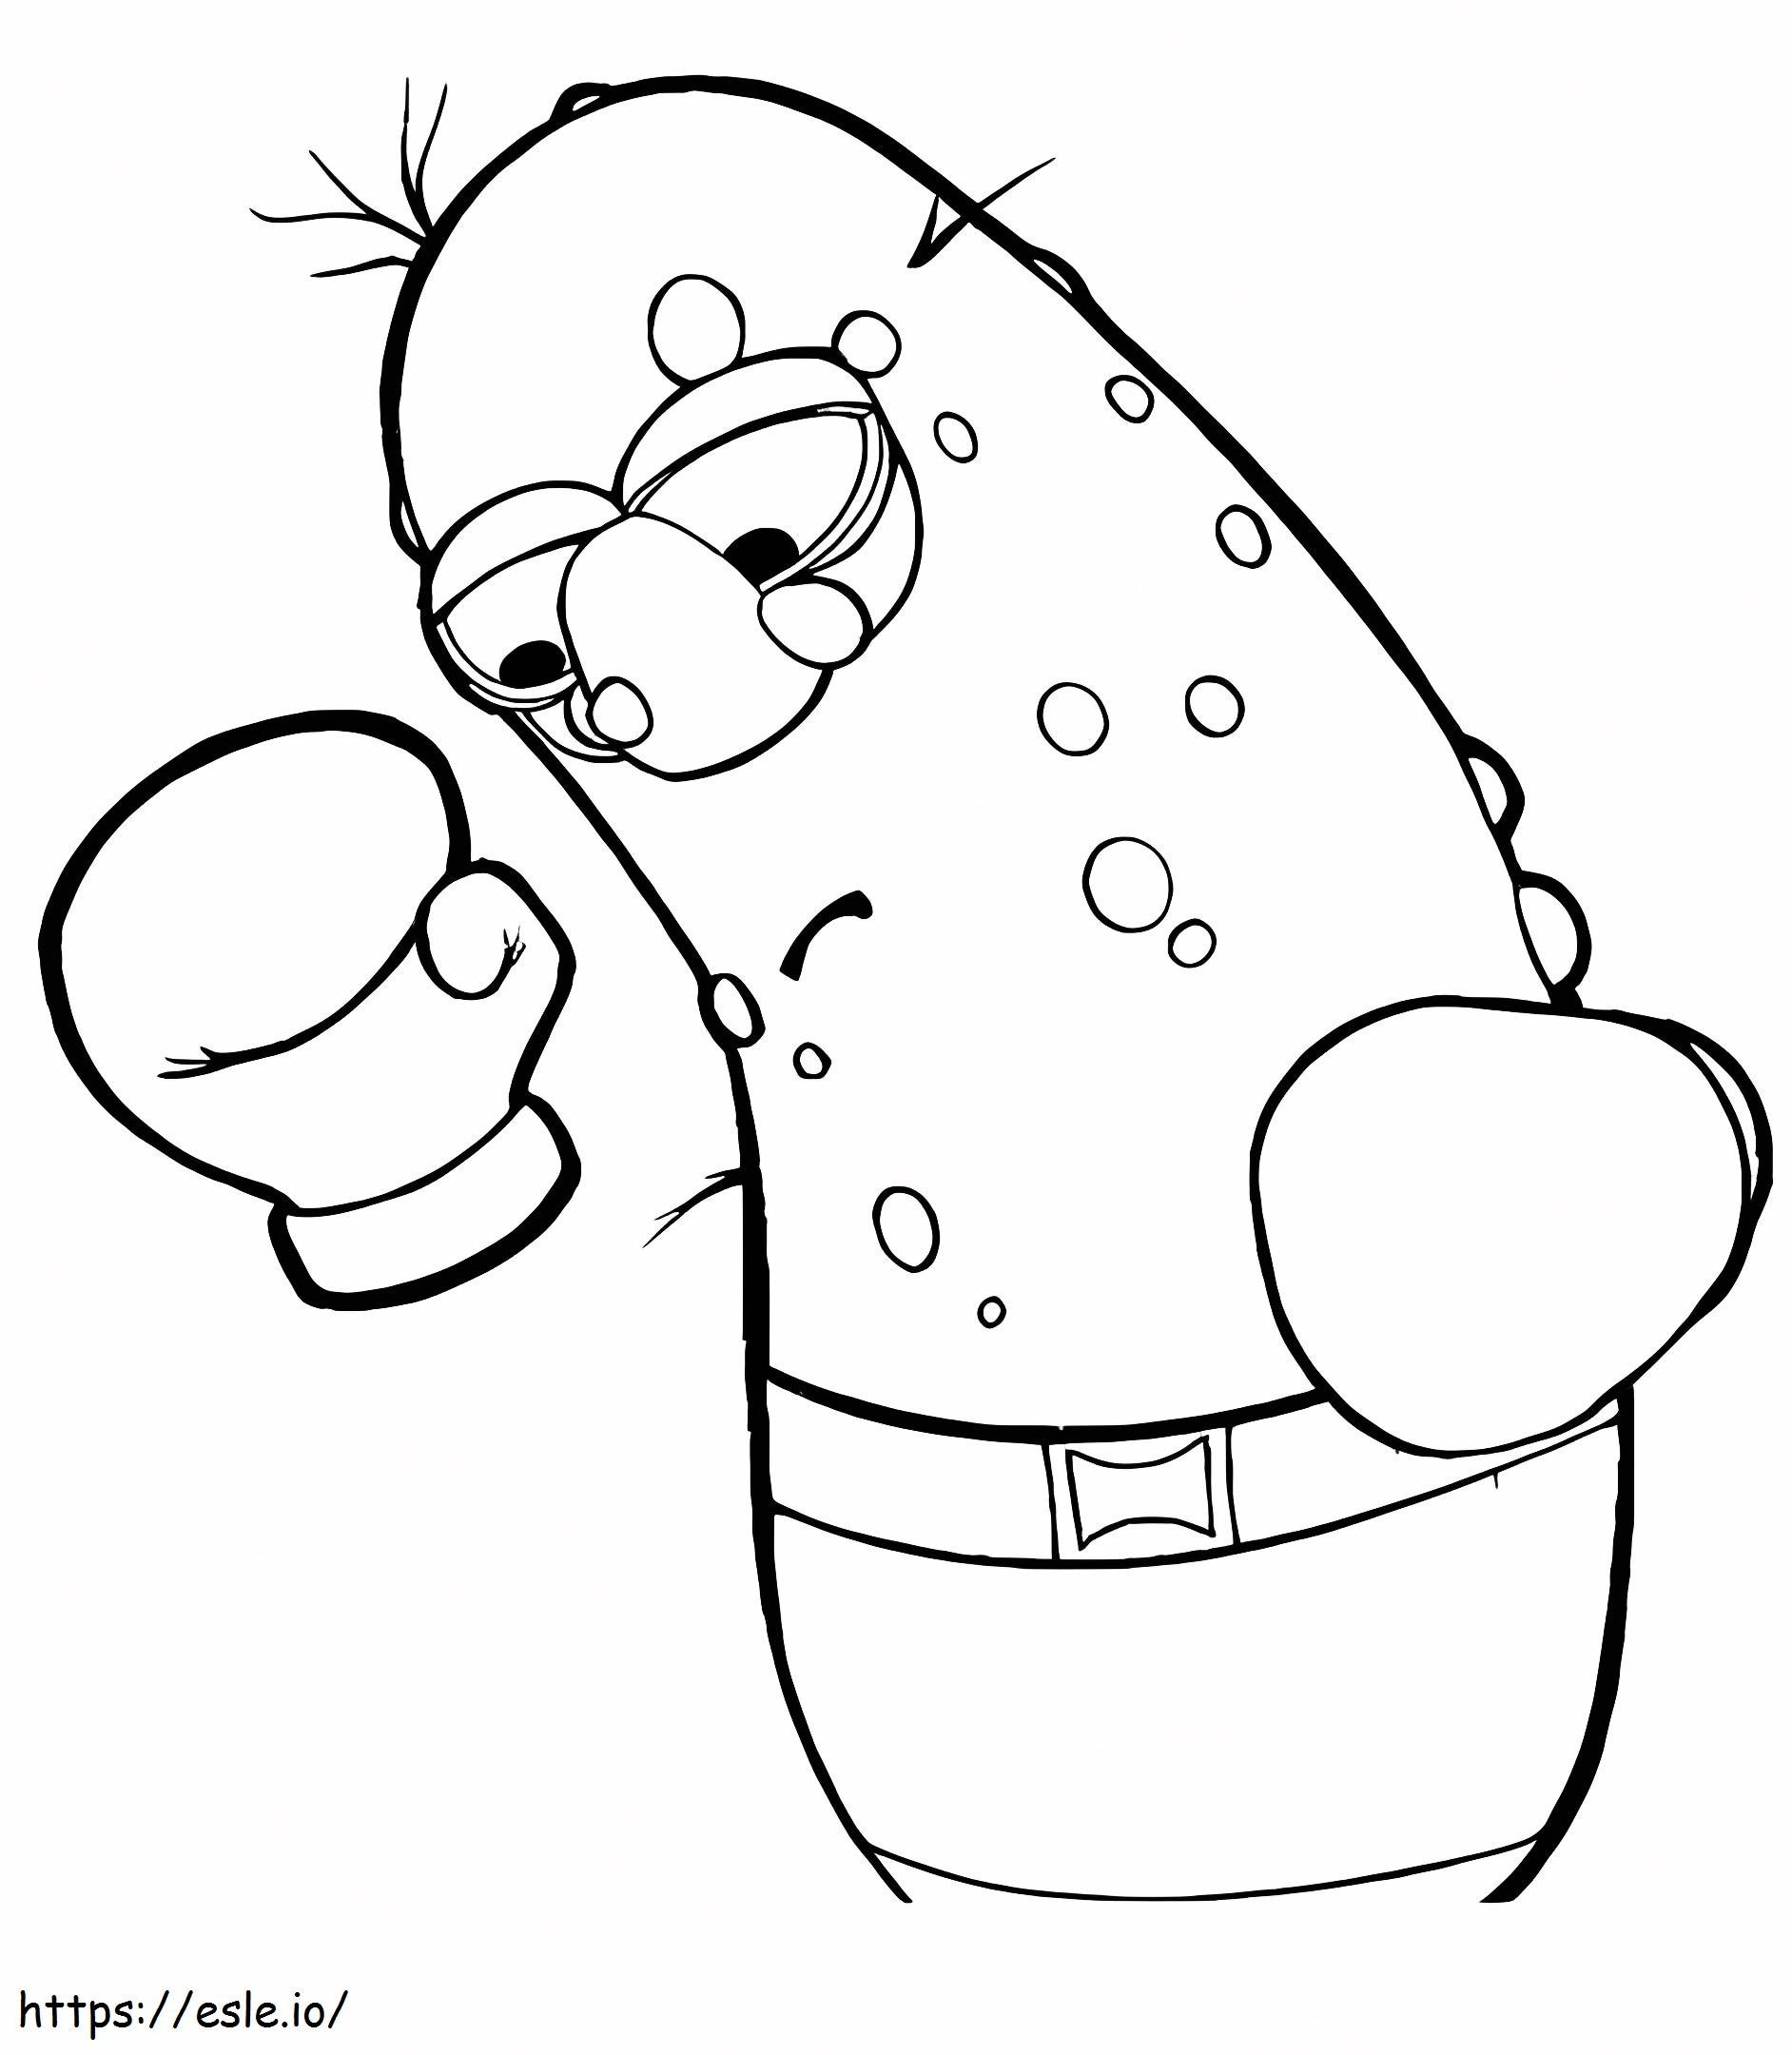 Cucumber Boxer coloring page